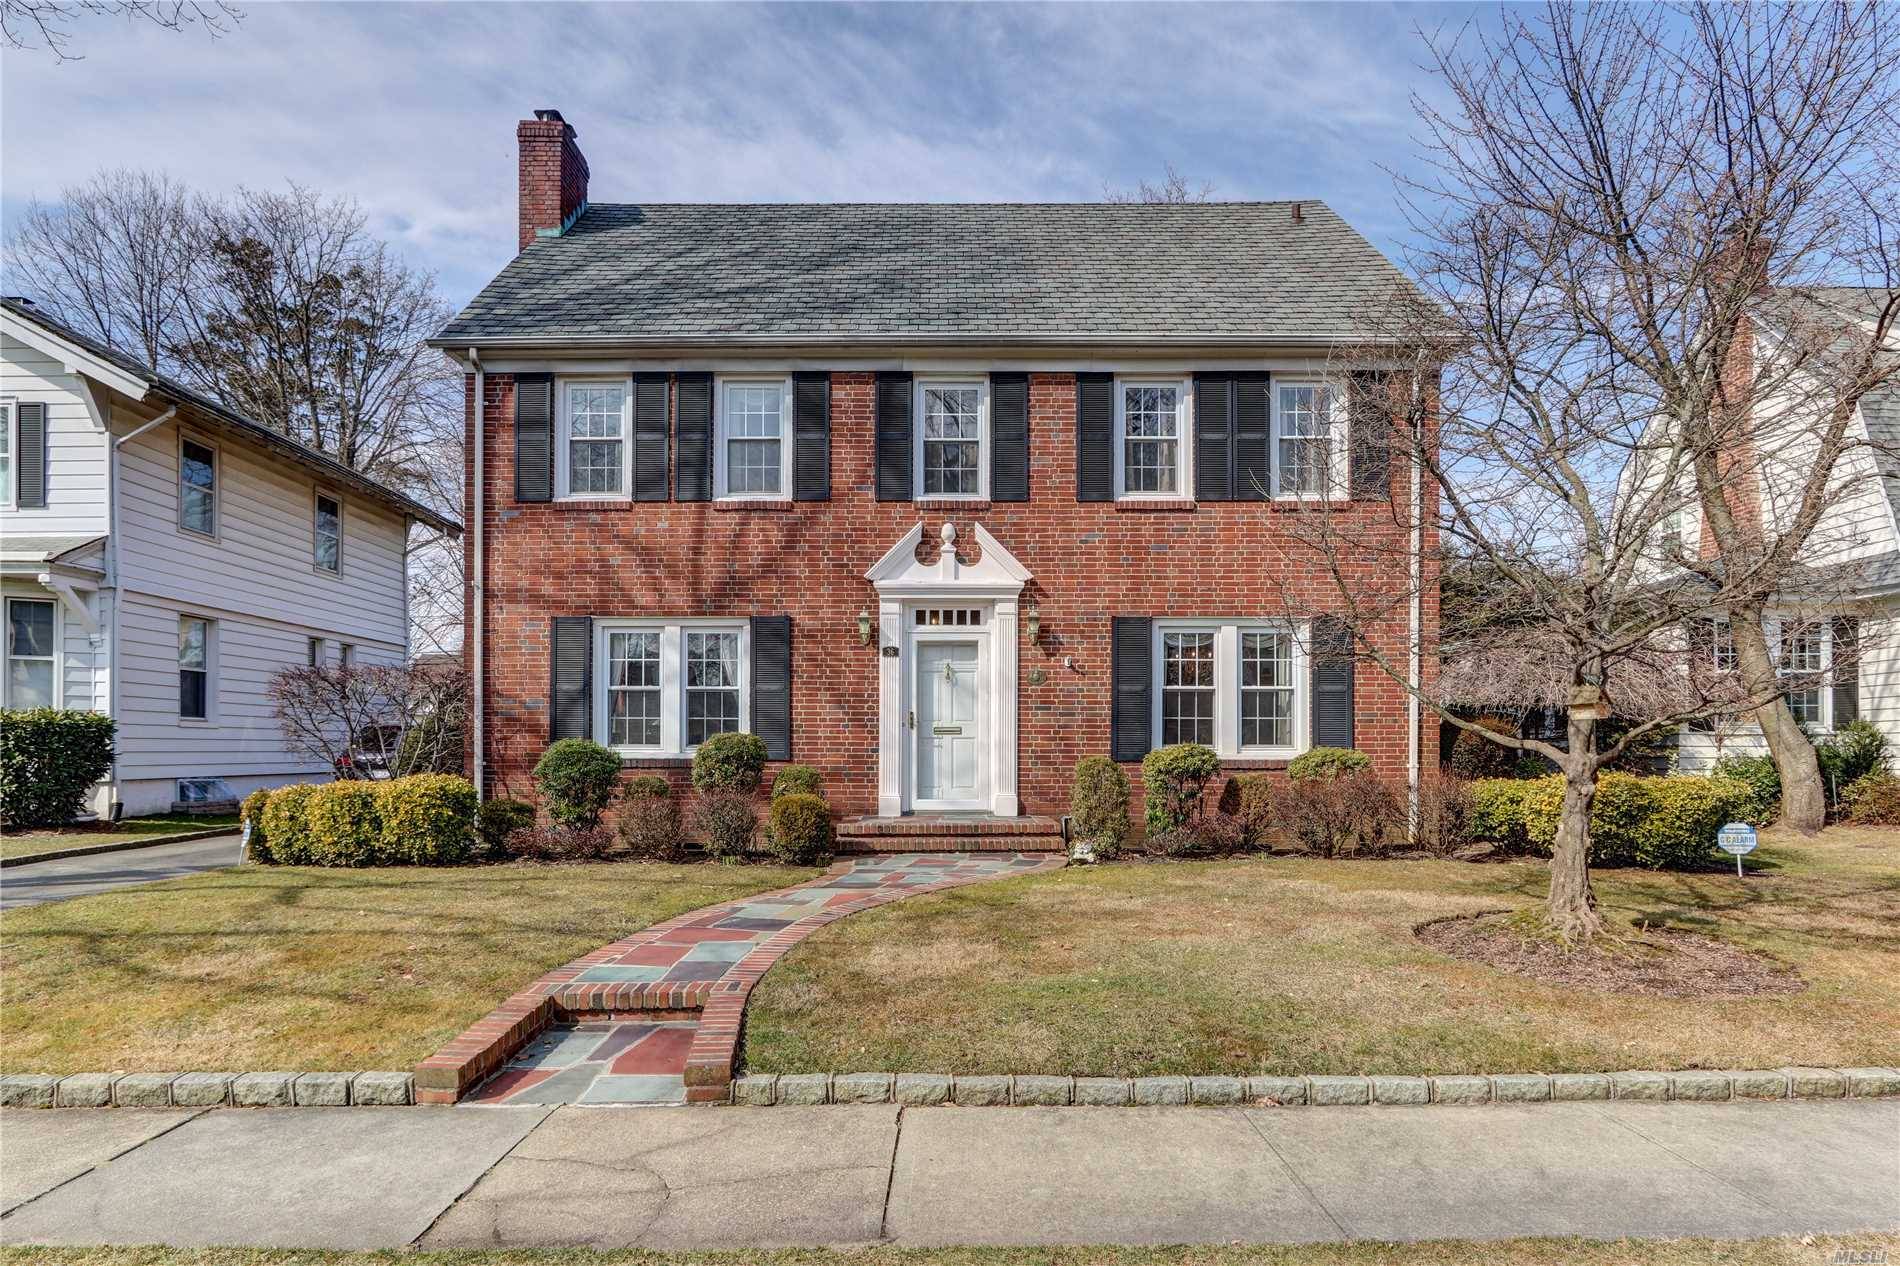 Perfectly situated mid block brick center hall colonial with oversized bedrooms, including master with suite.